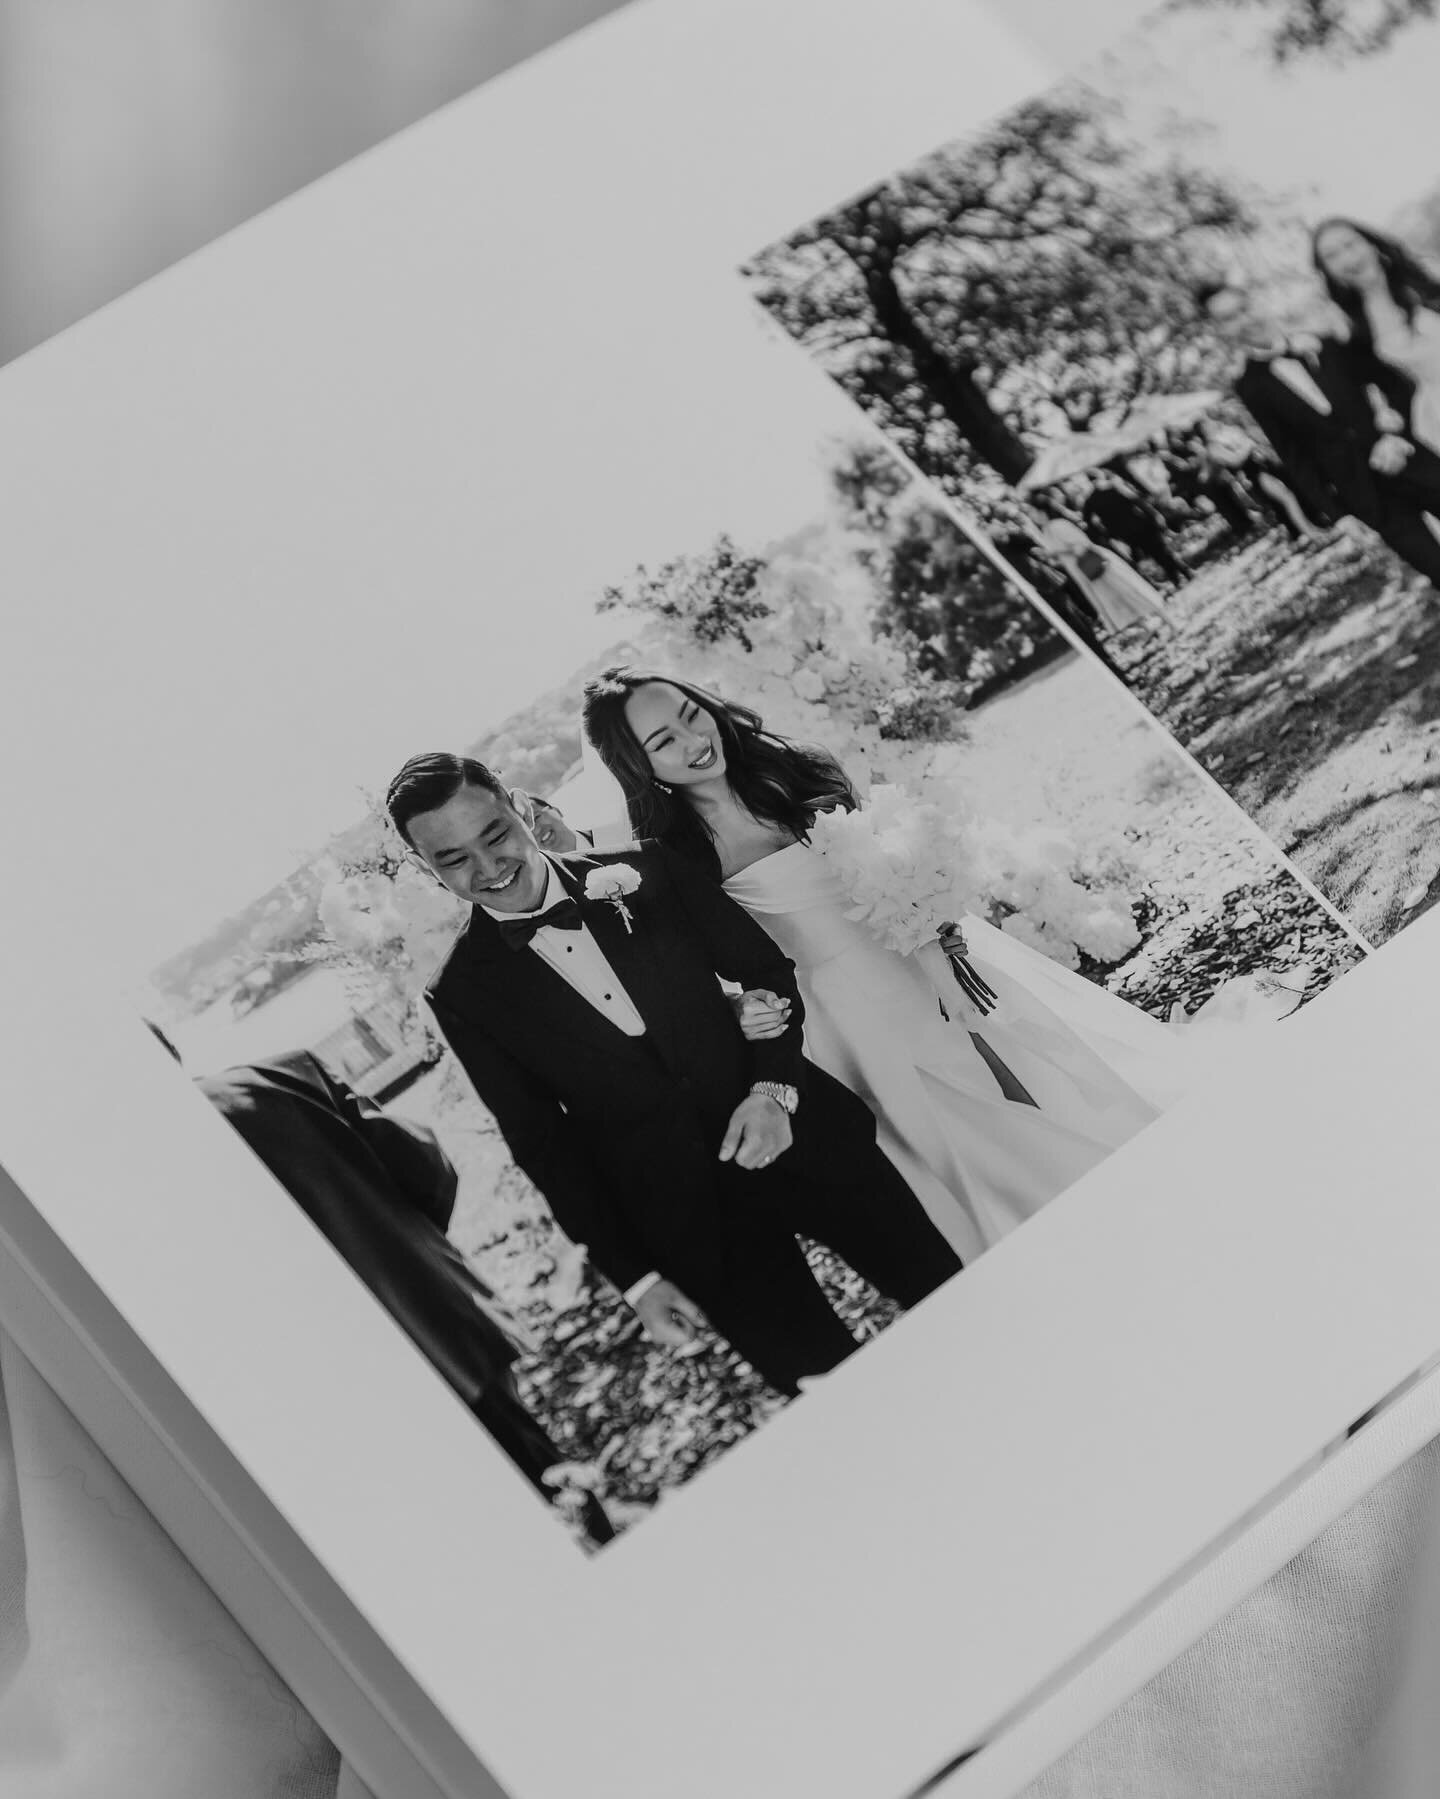 Sofia and Andrew&rsquo;s wedding album ✨ I&rsquo;ve forever been meaning to share photos of this beautiful album custom made for Sofia and Andrew. Seeing wedding memories come to life on fine art paper is just so special 🤍 Sofia and Andrew chose a s